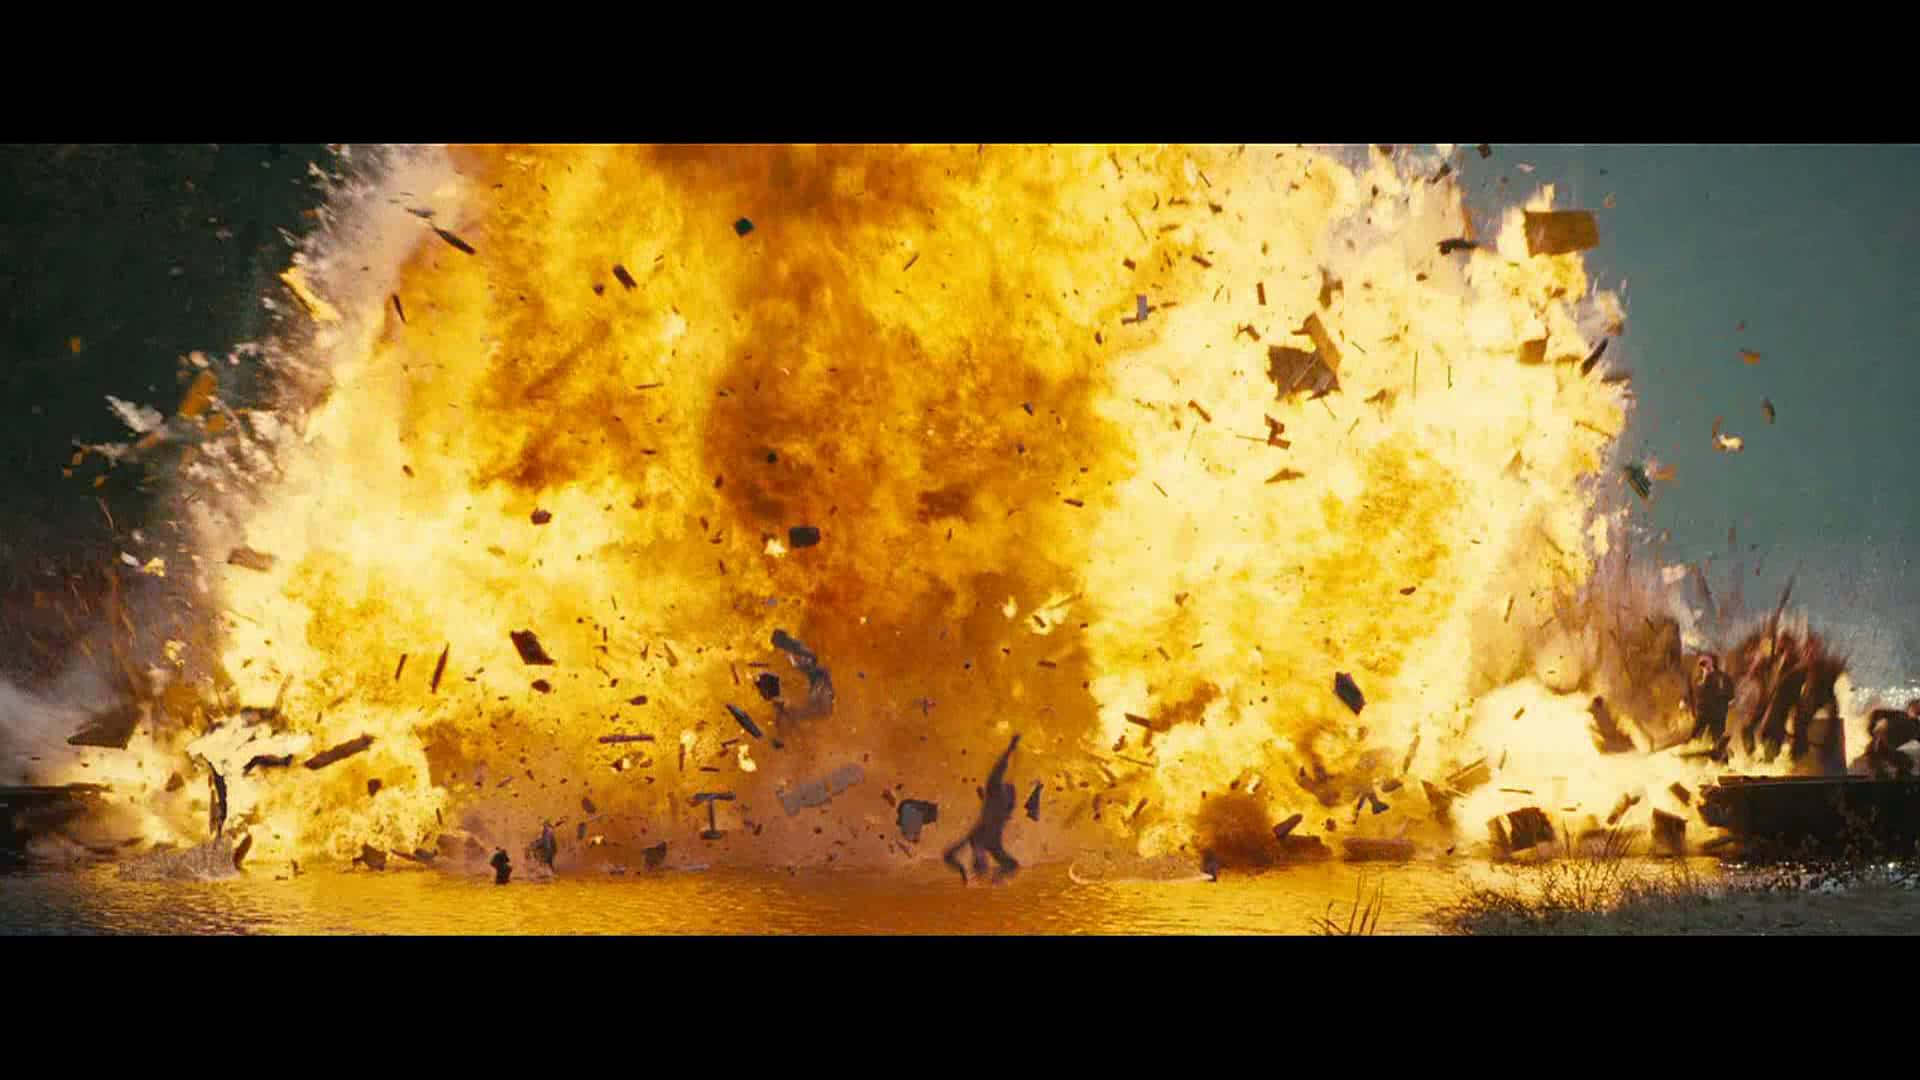 Download Huge Action Movie Explosion Background Wallpapers Com